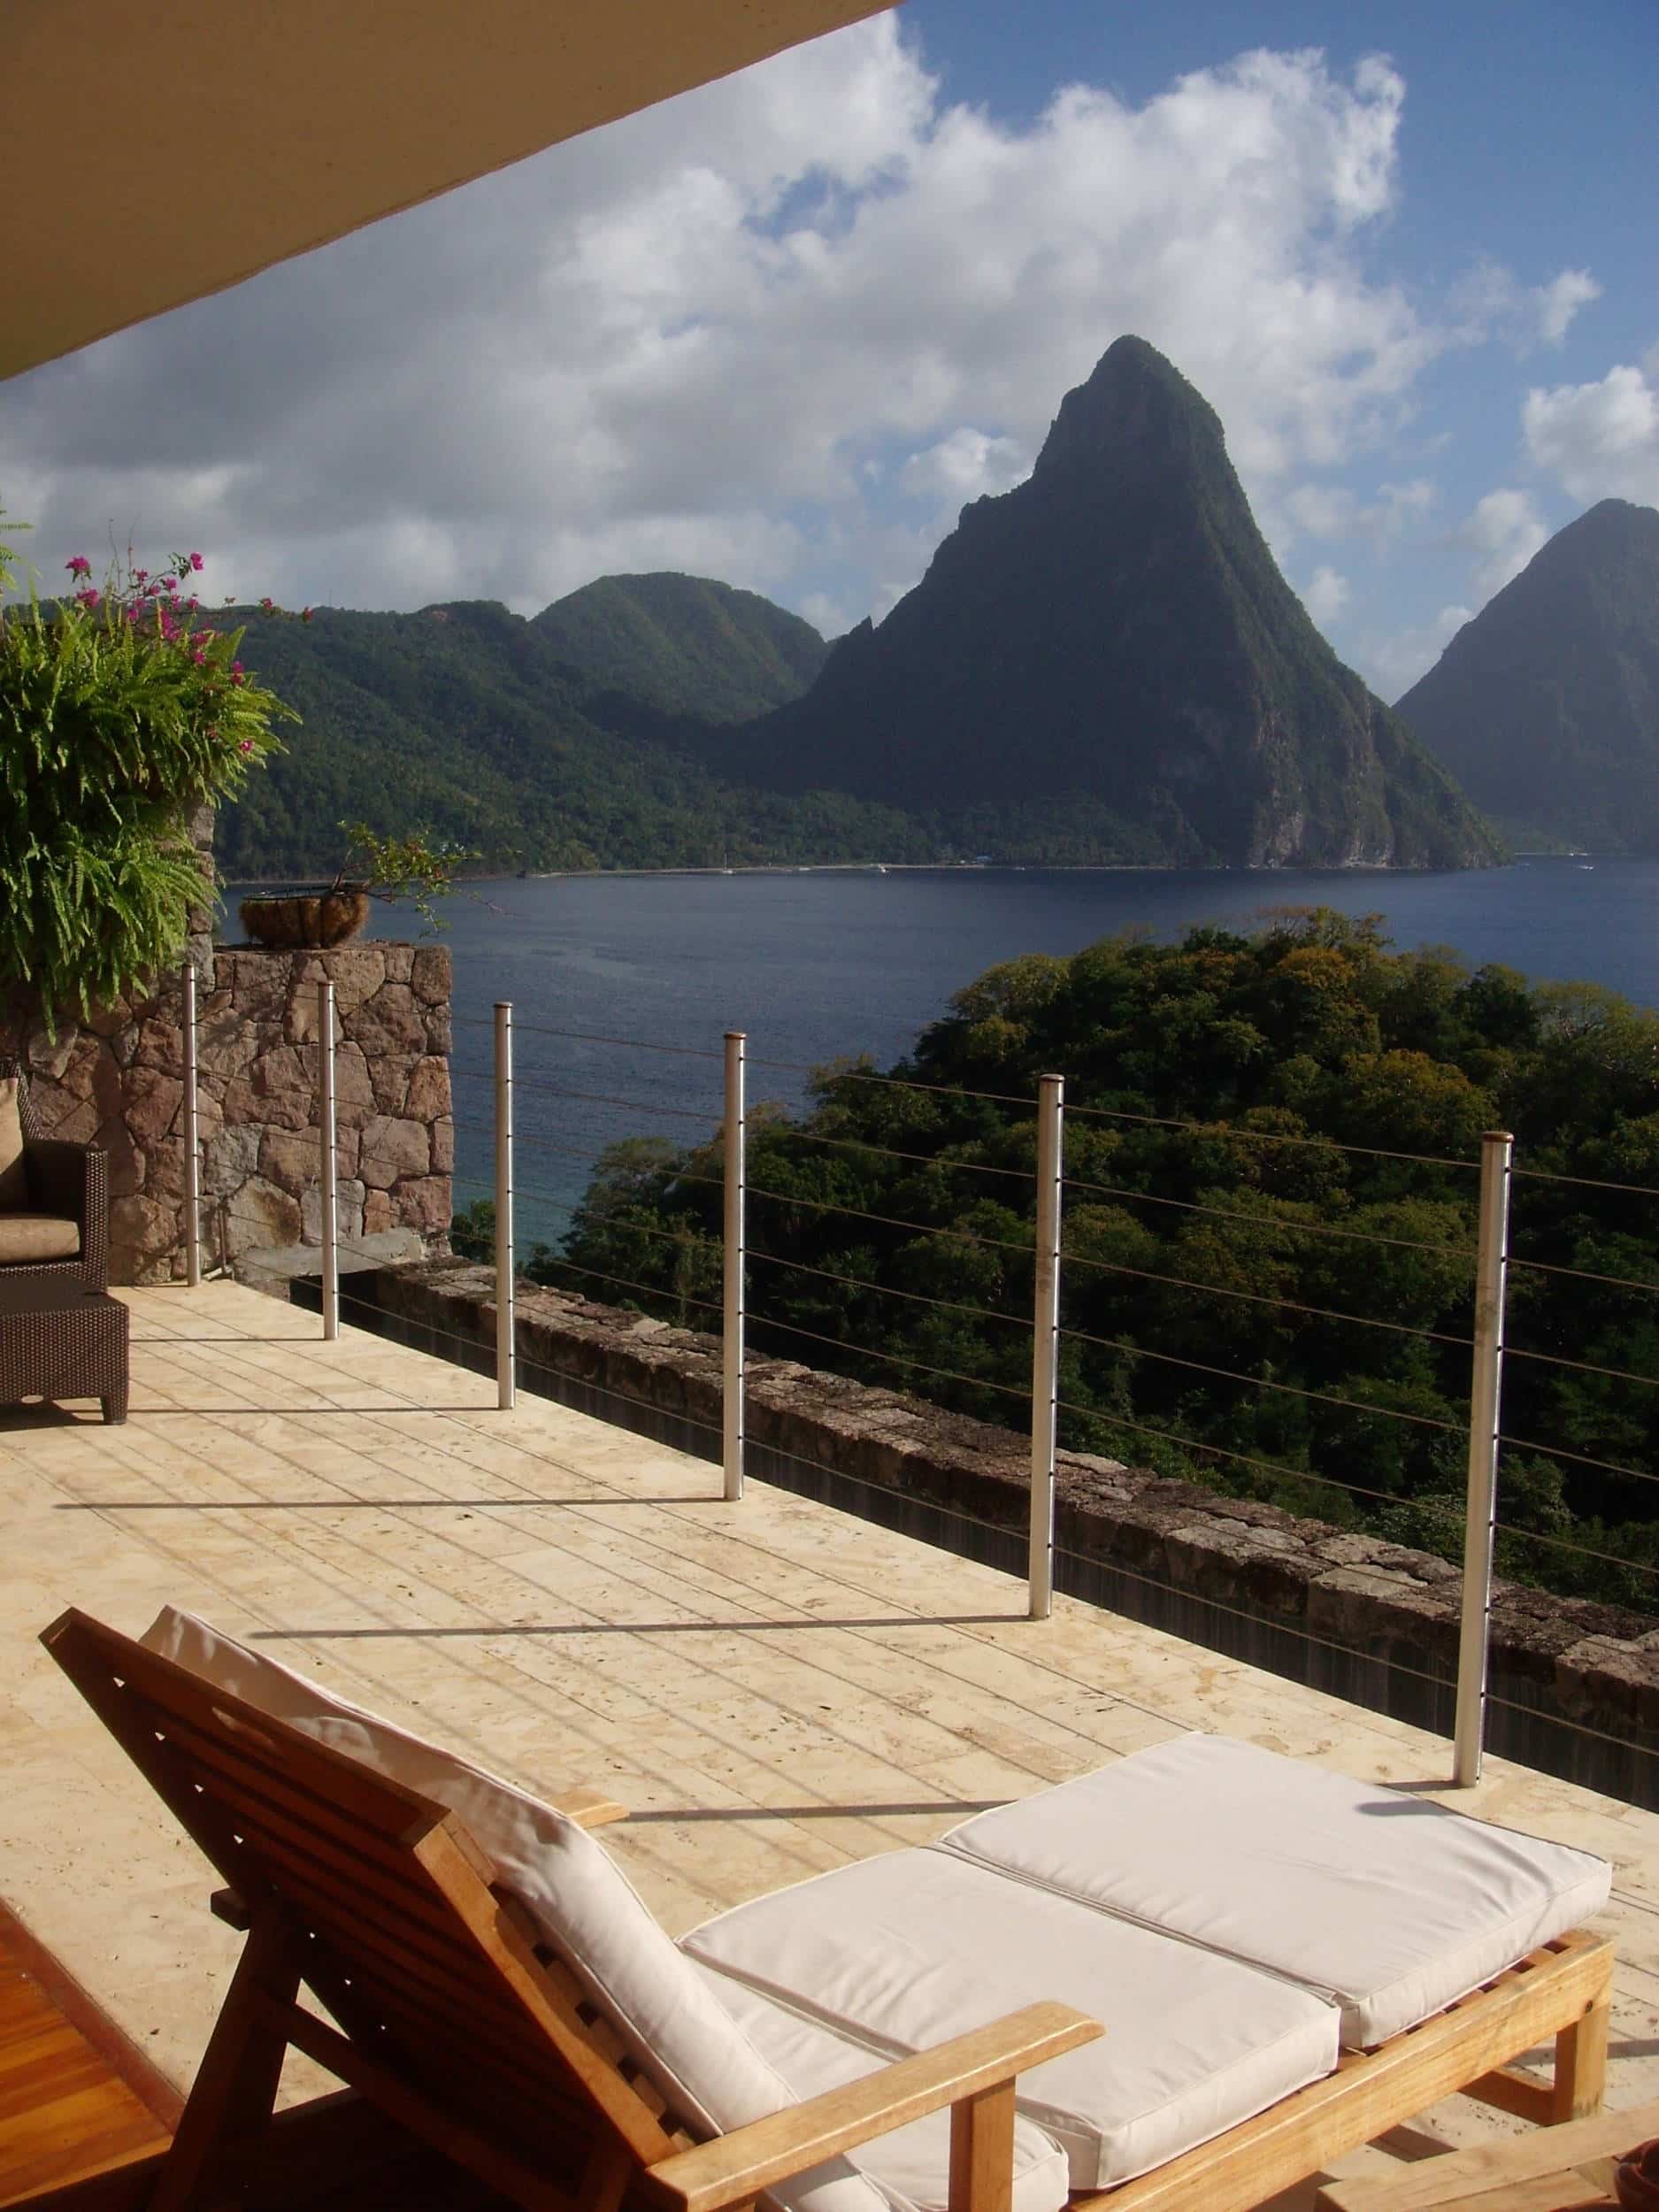 View of Petit Piton from a room at Jade Mountain.